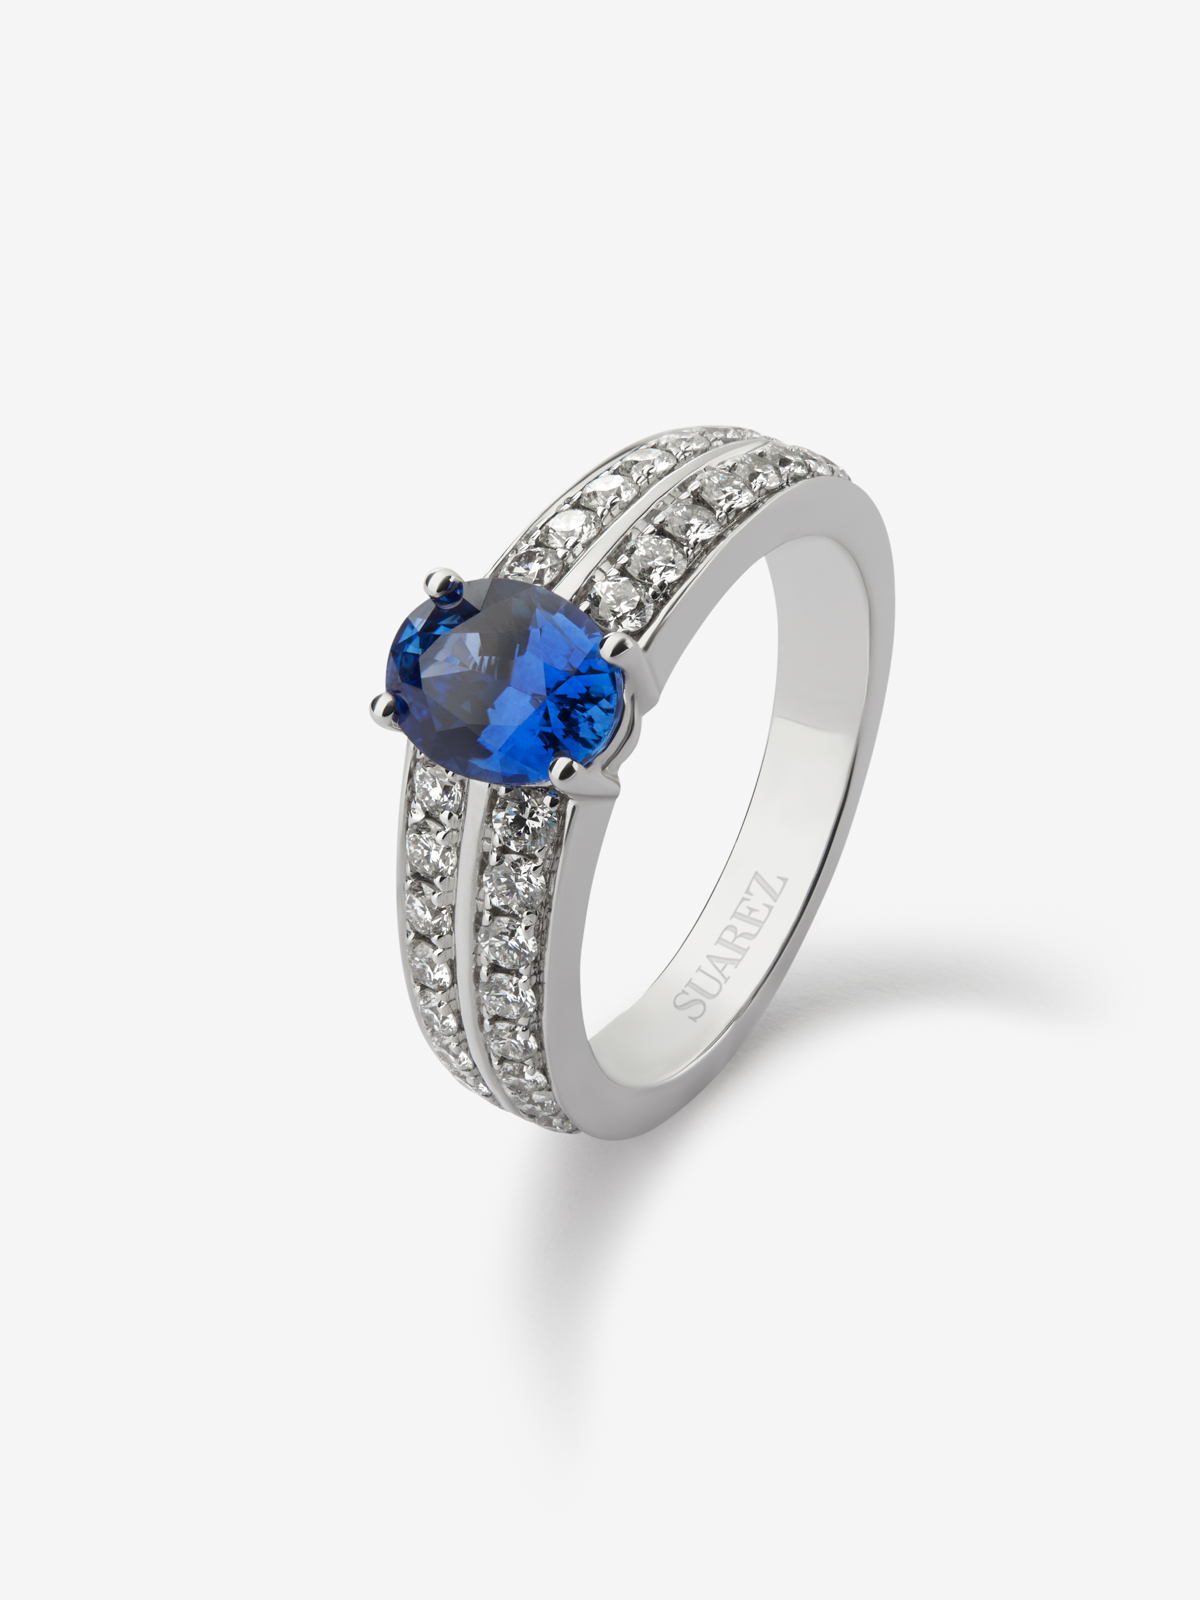 18K white gold ring with vivid blue sapphire in oval cut of 1,292 cts and 32 brilliant cut diamonds with a total of 0.6 cts